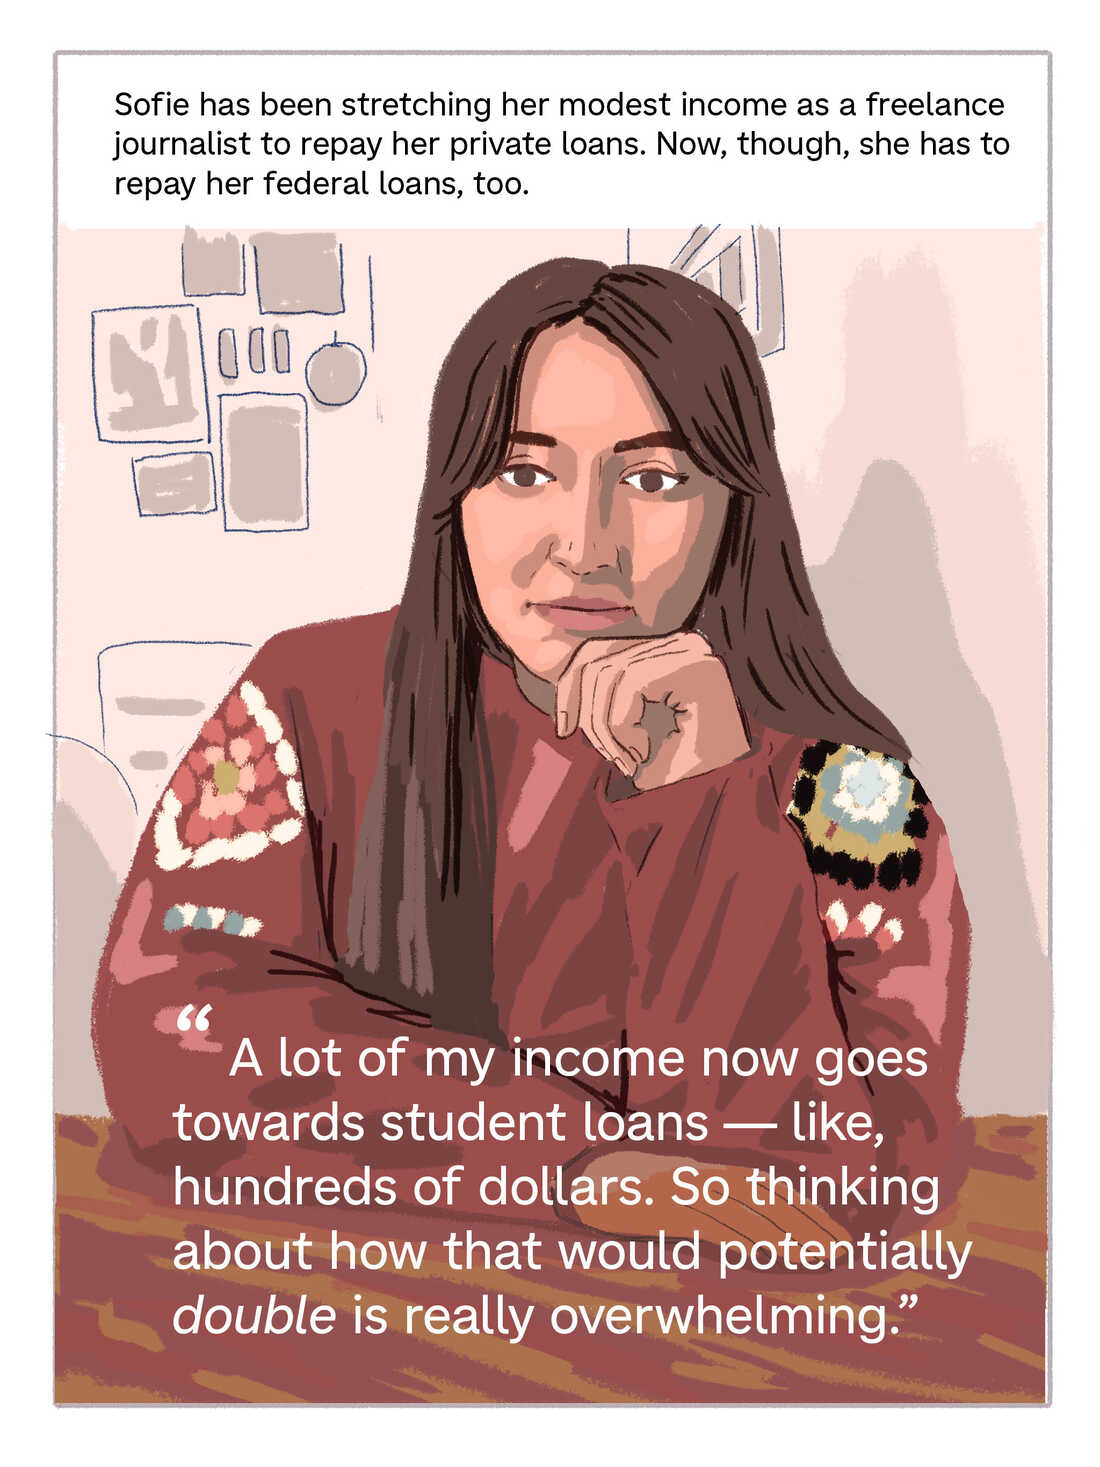 Text: Sofie has been stretching her modest income as a freelance journalist to repay her private loans. Now, though, she has to repay her federal loans, too. Quote: "A lot of my income now goes towards student loans — like, hundreds of dollars. So thinking about how that would potentially double is really overwhelming."